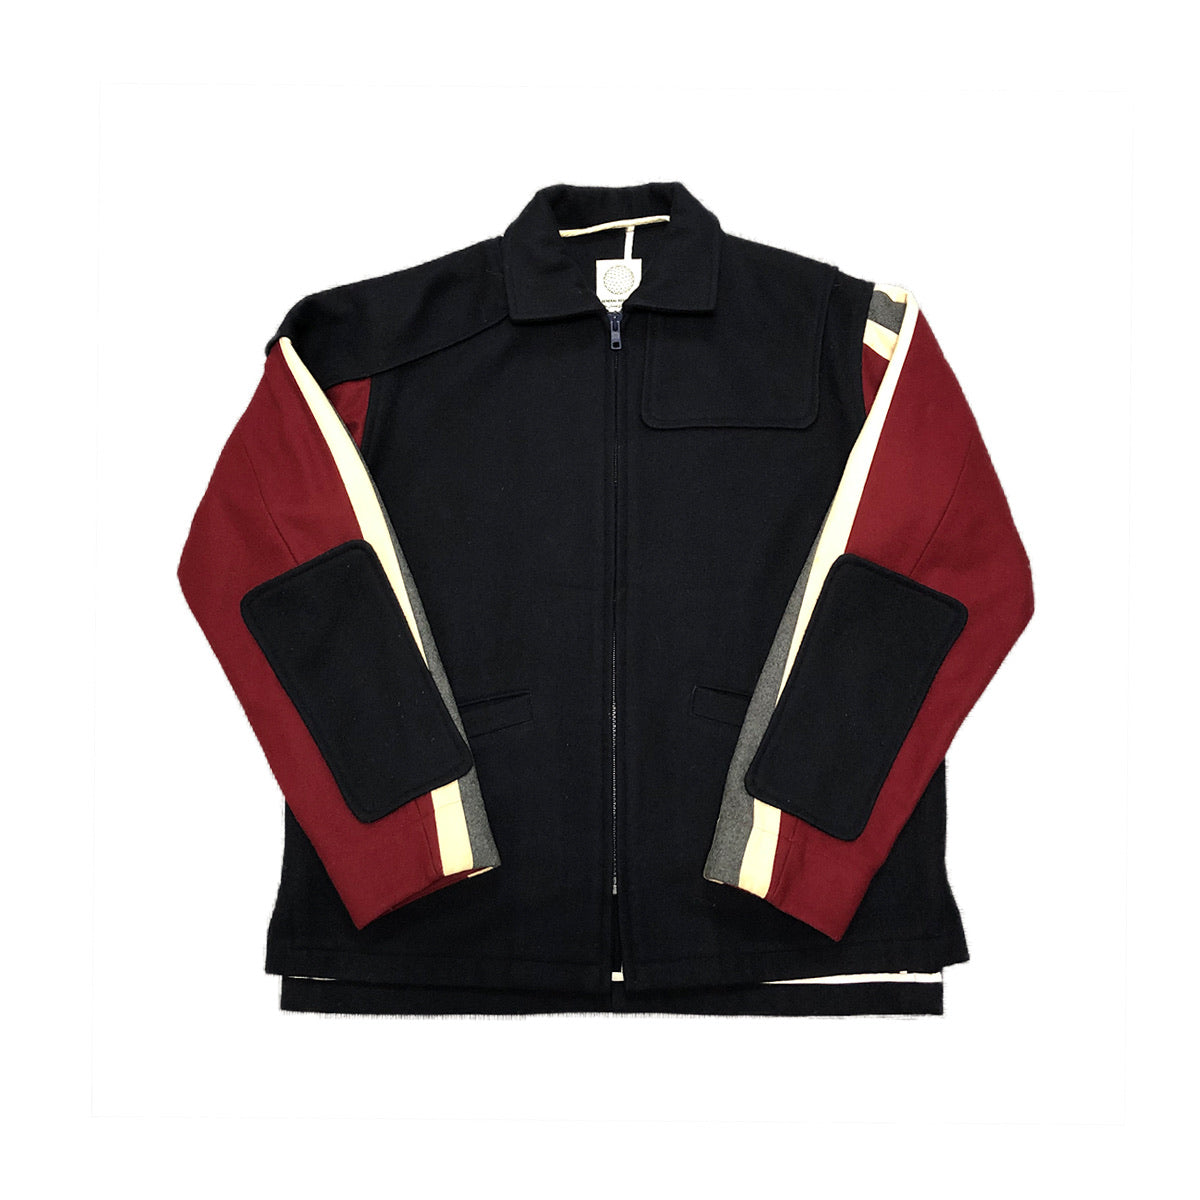 GENERAL RESEARCH 2000AW REINFORCED BOMBER JACKET